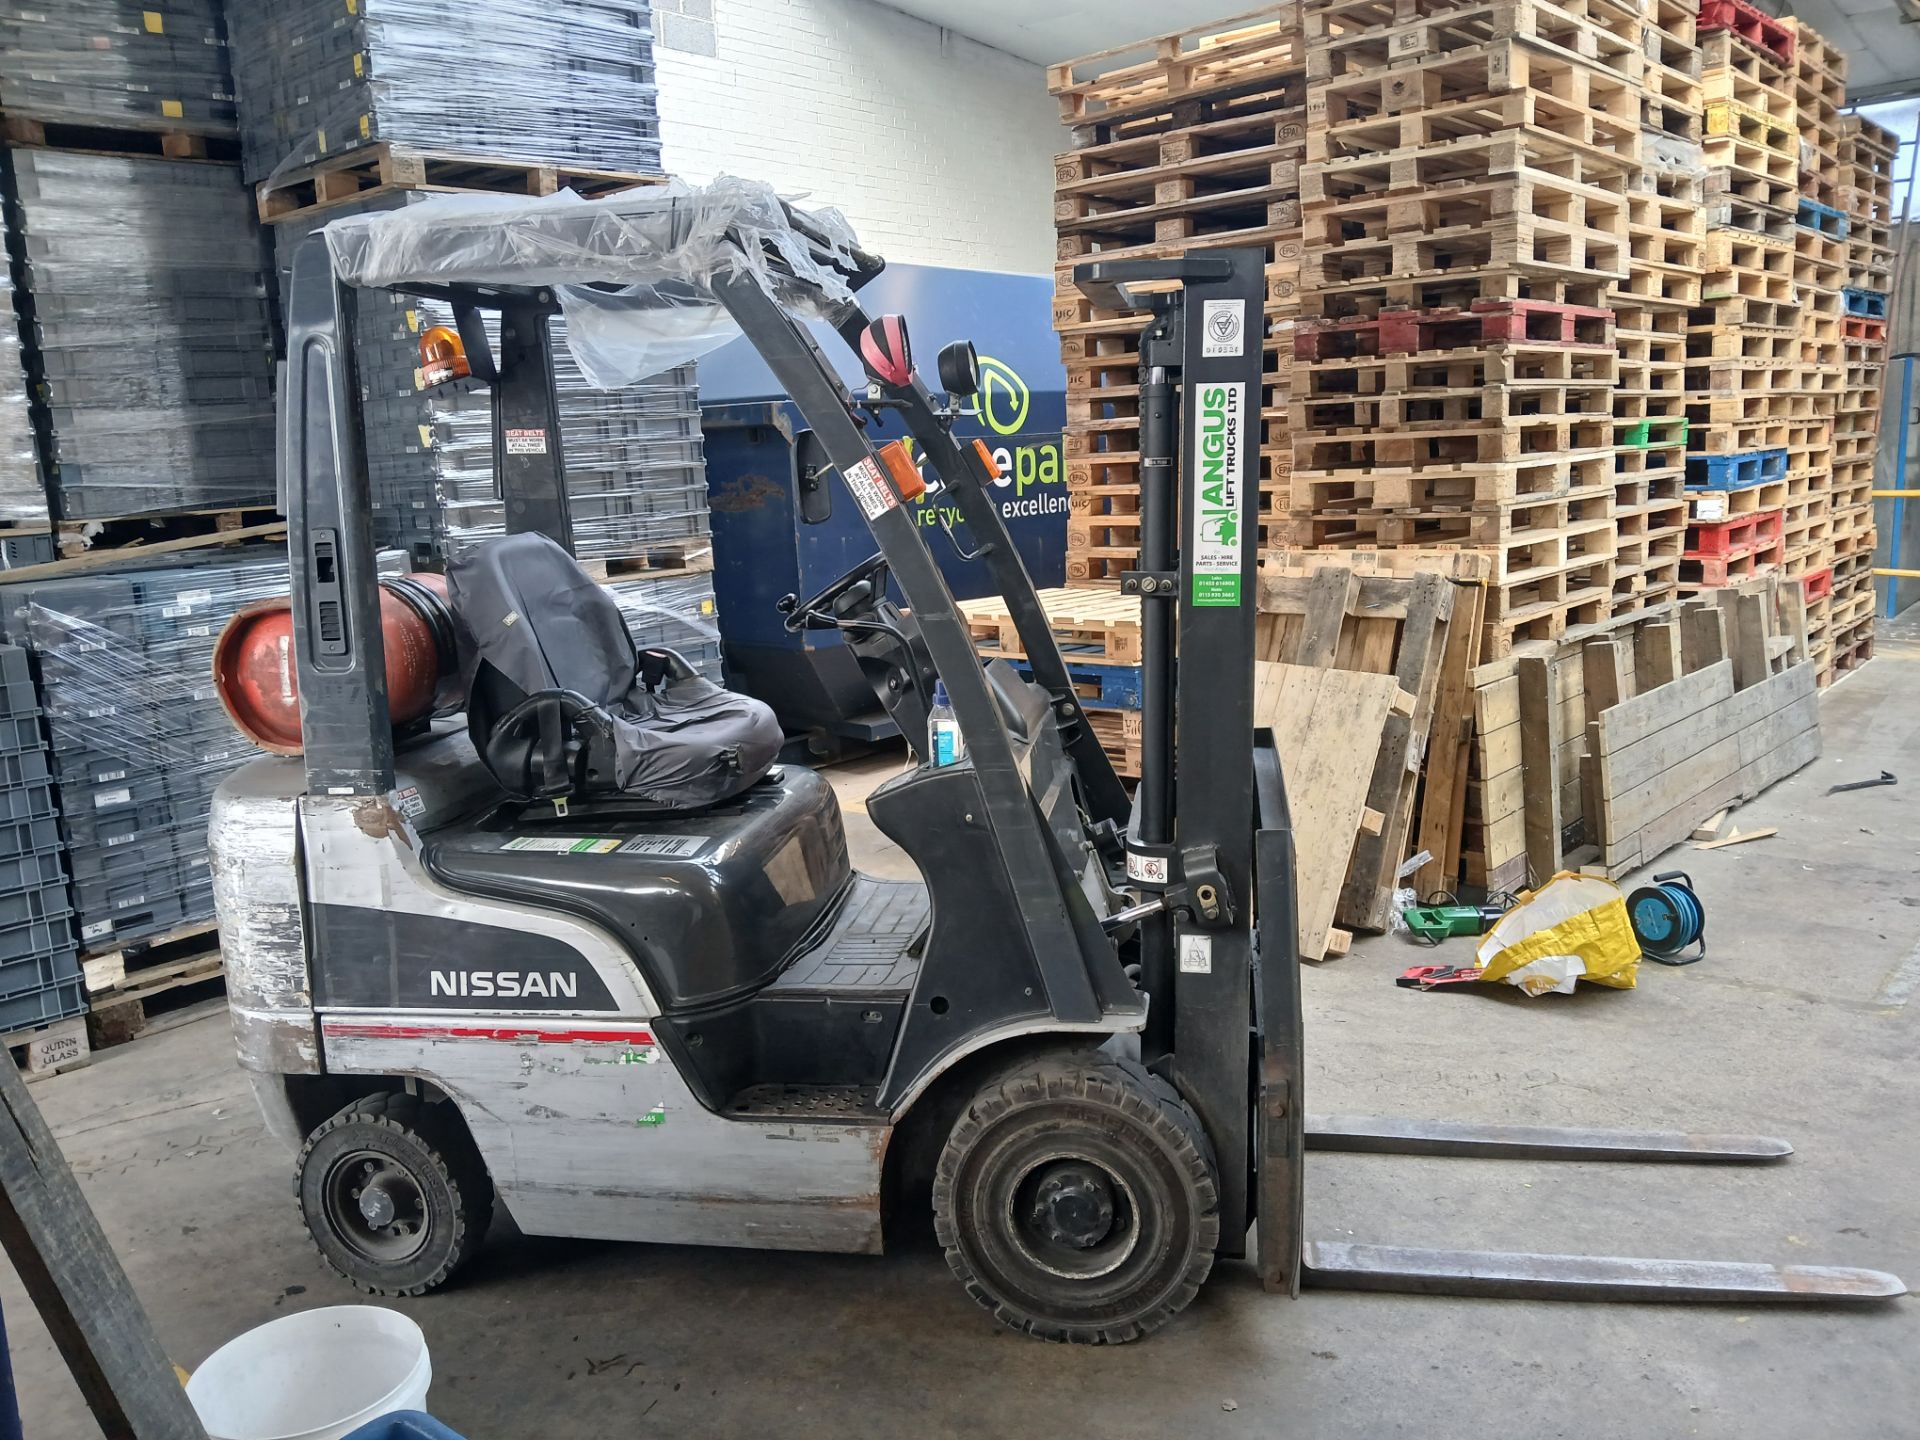 Nissan EBT P1F1 1,500kg capacity gas powered forklift truck, Serial Number P1F1-001804, Year 2009, - Image 3 of 5